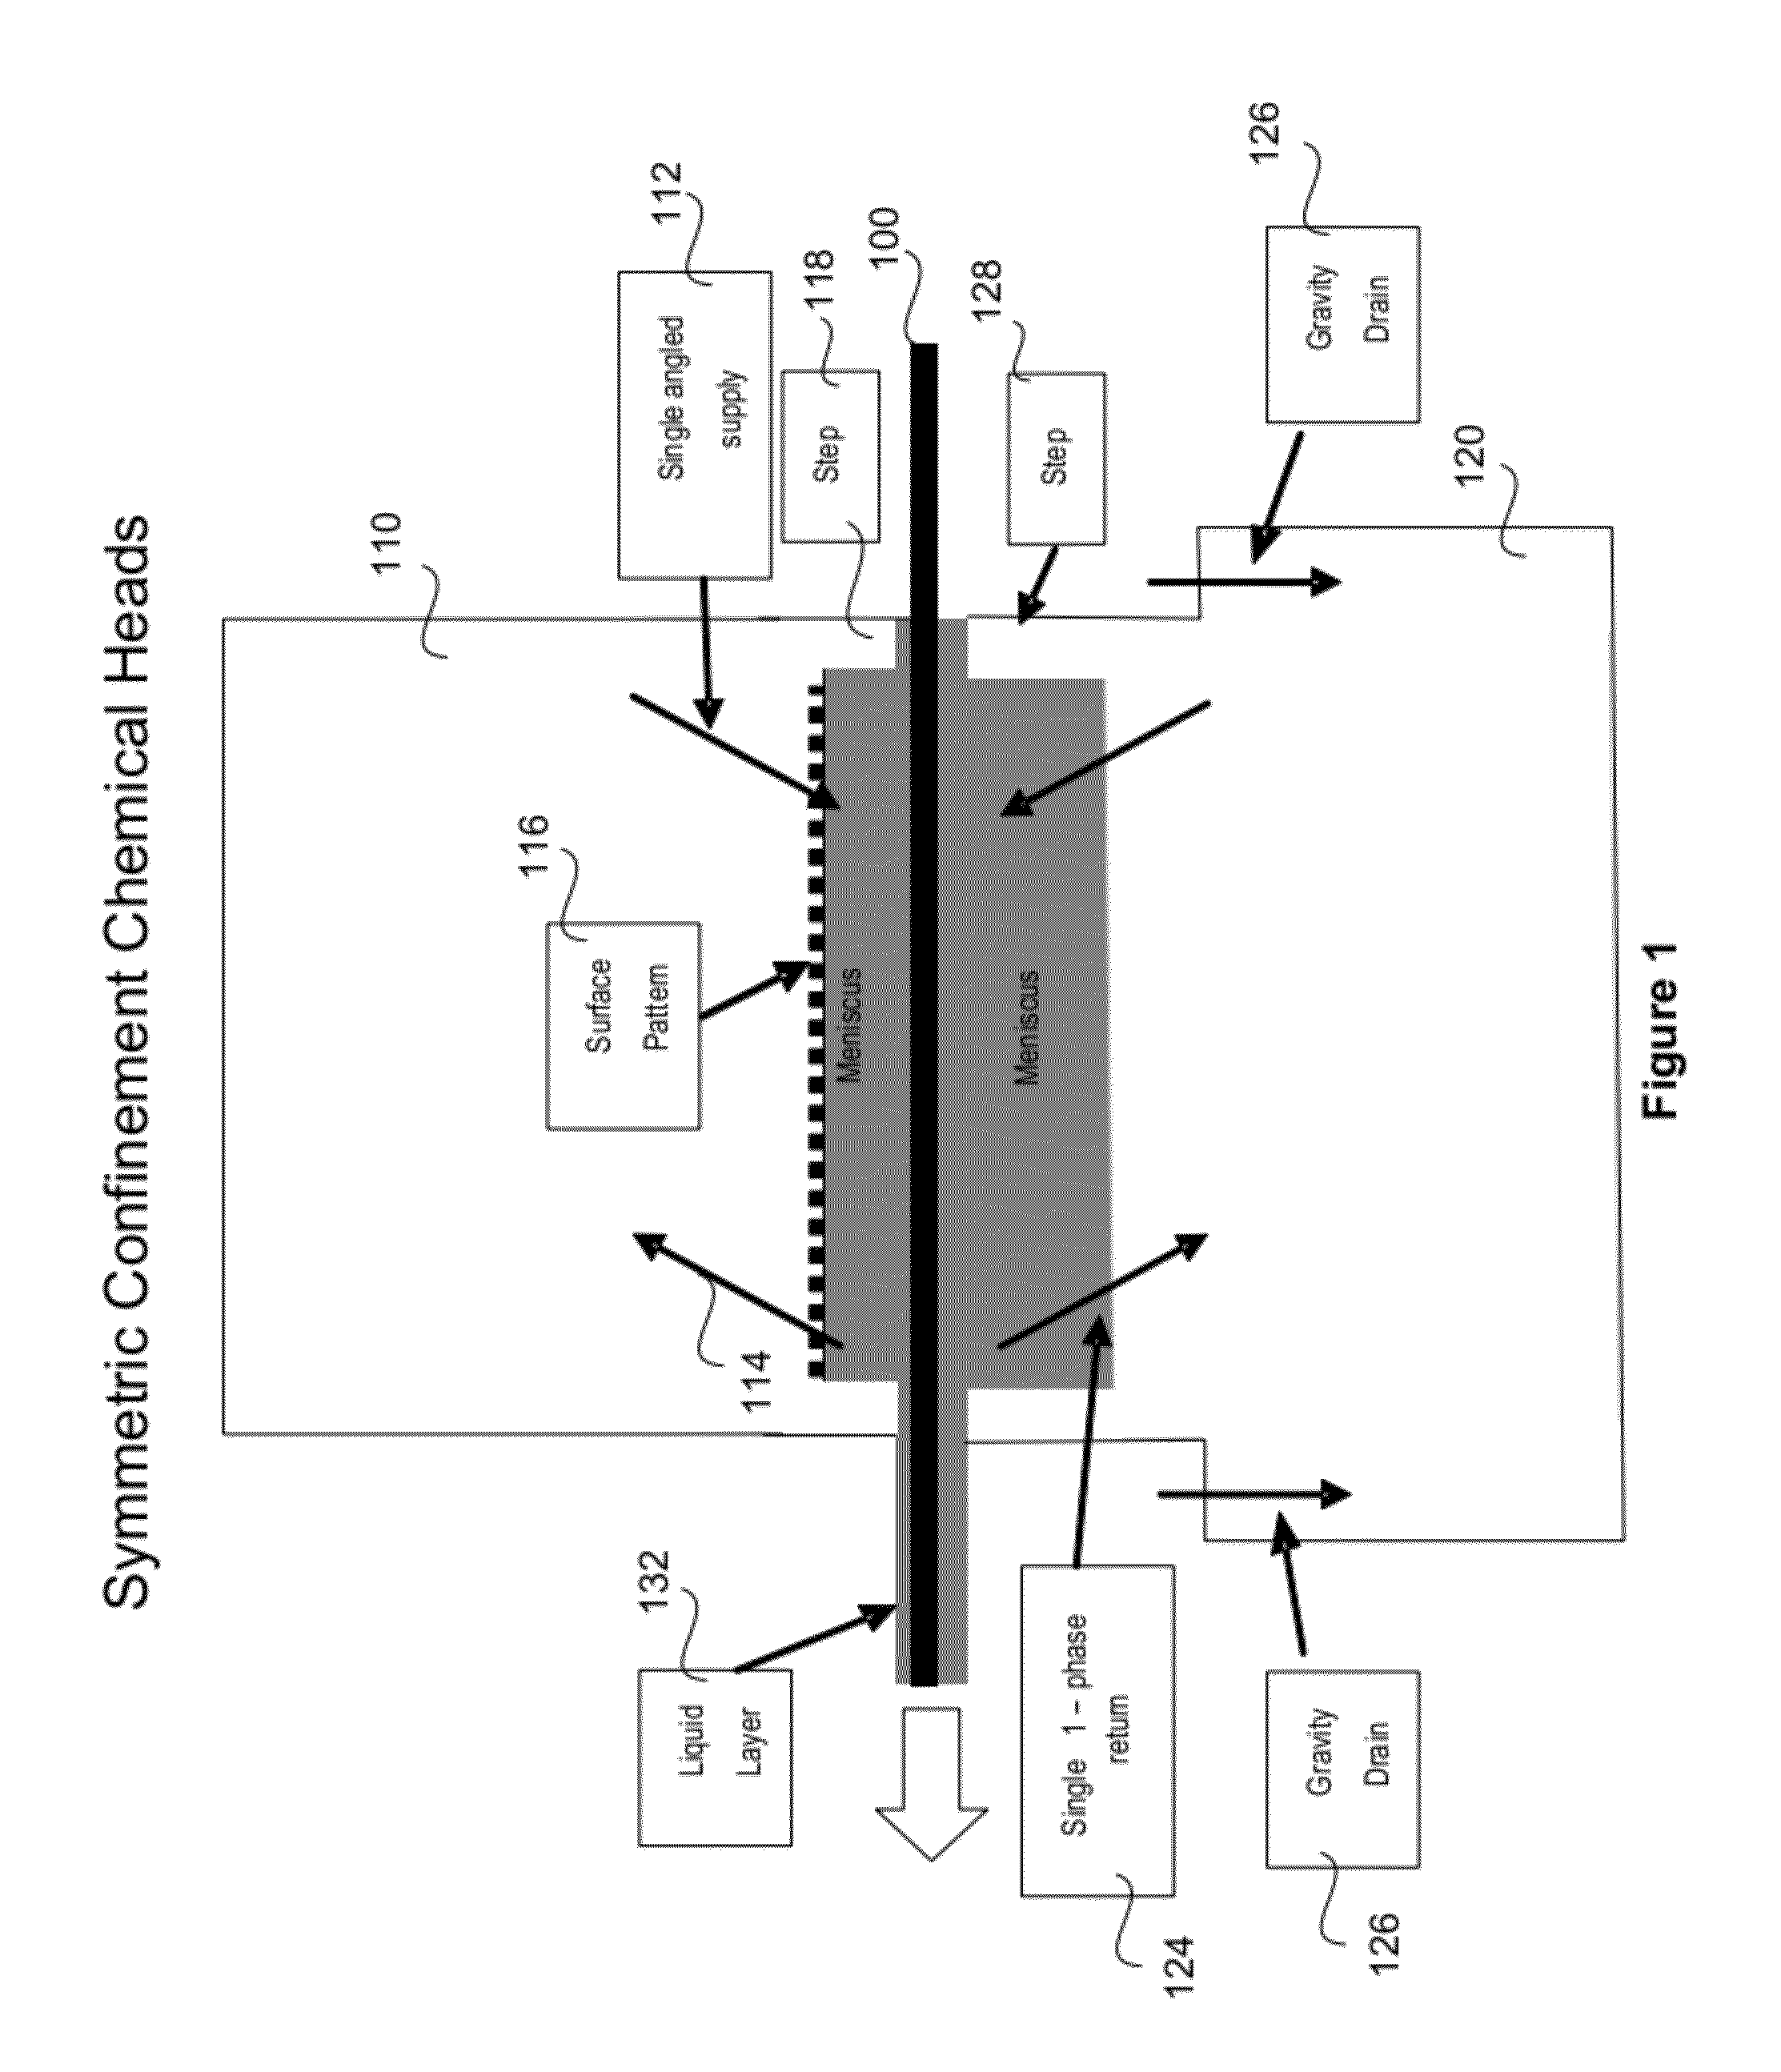 Method and apparatus for physical confinement of a liquid meniscus over a semiconductor wafer